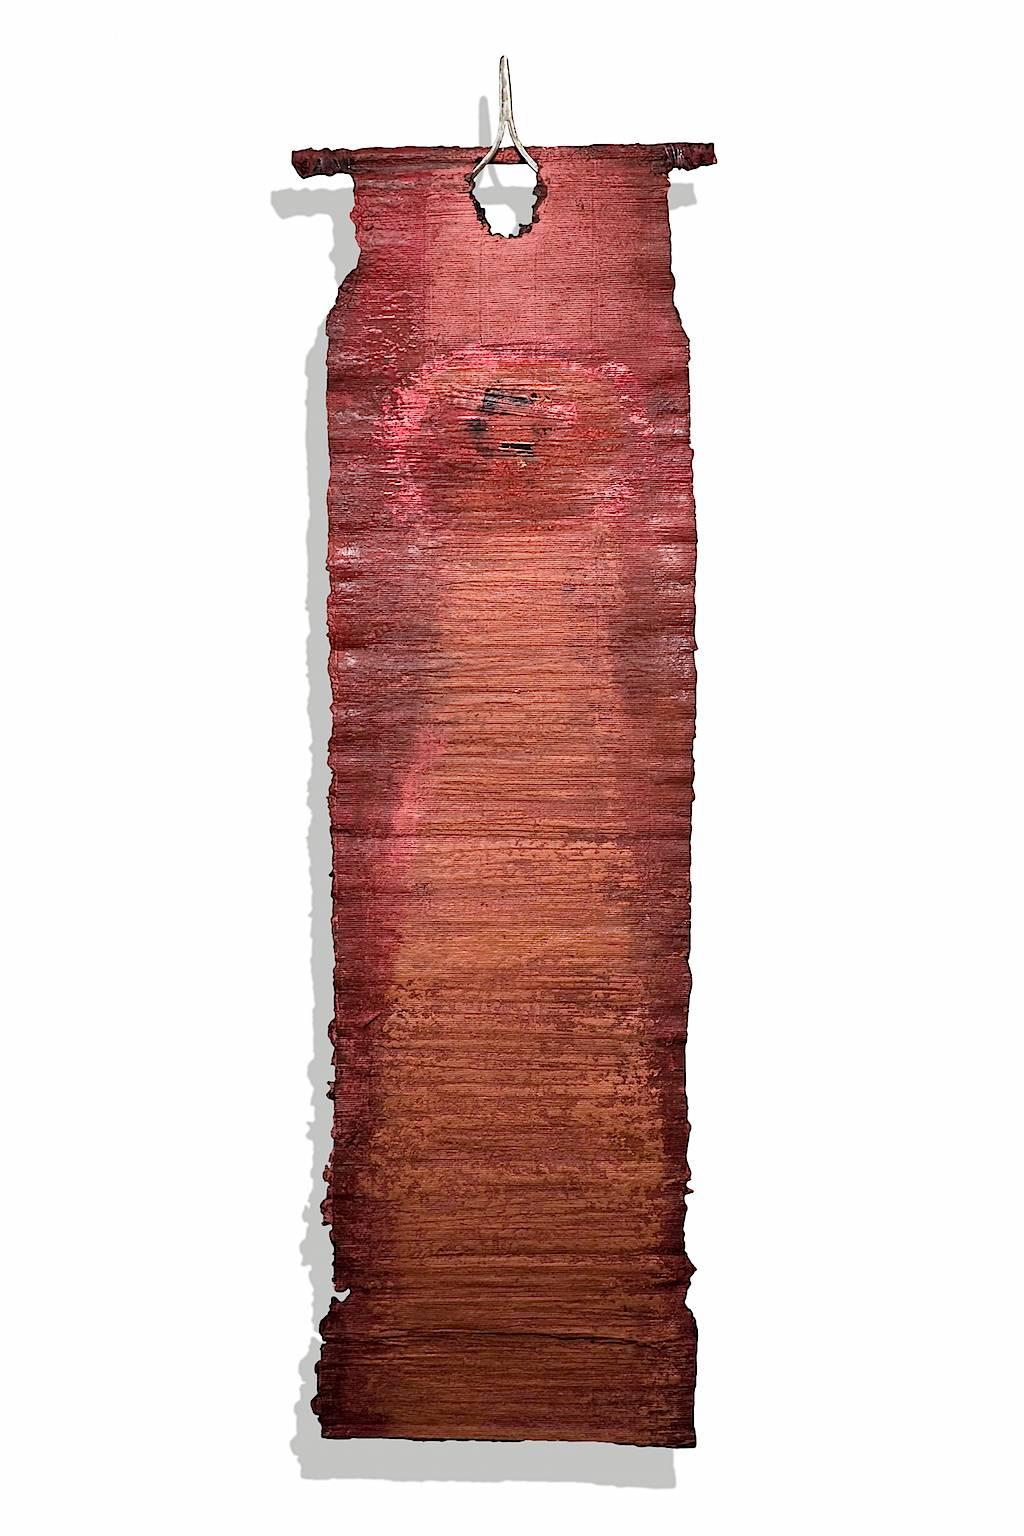 "Fading Out, Fading In" Abstract, Handmade Paper Wall Hanging Sculpture - Mixed Media Art by Joan Giordano